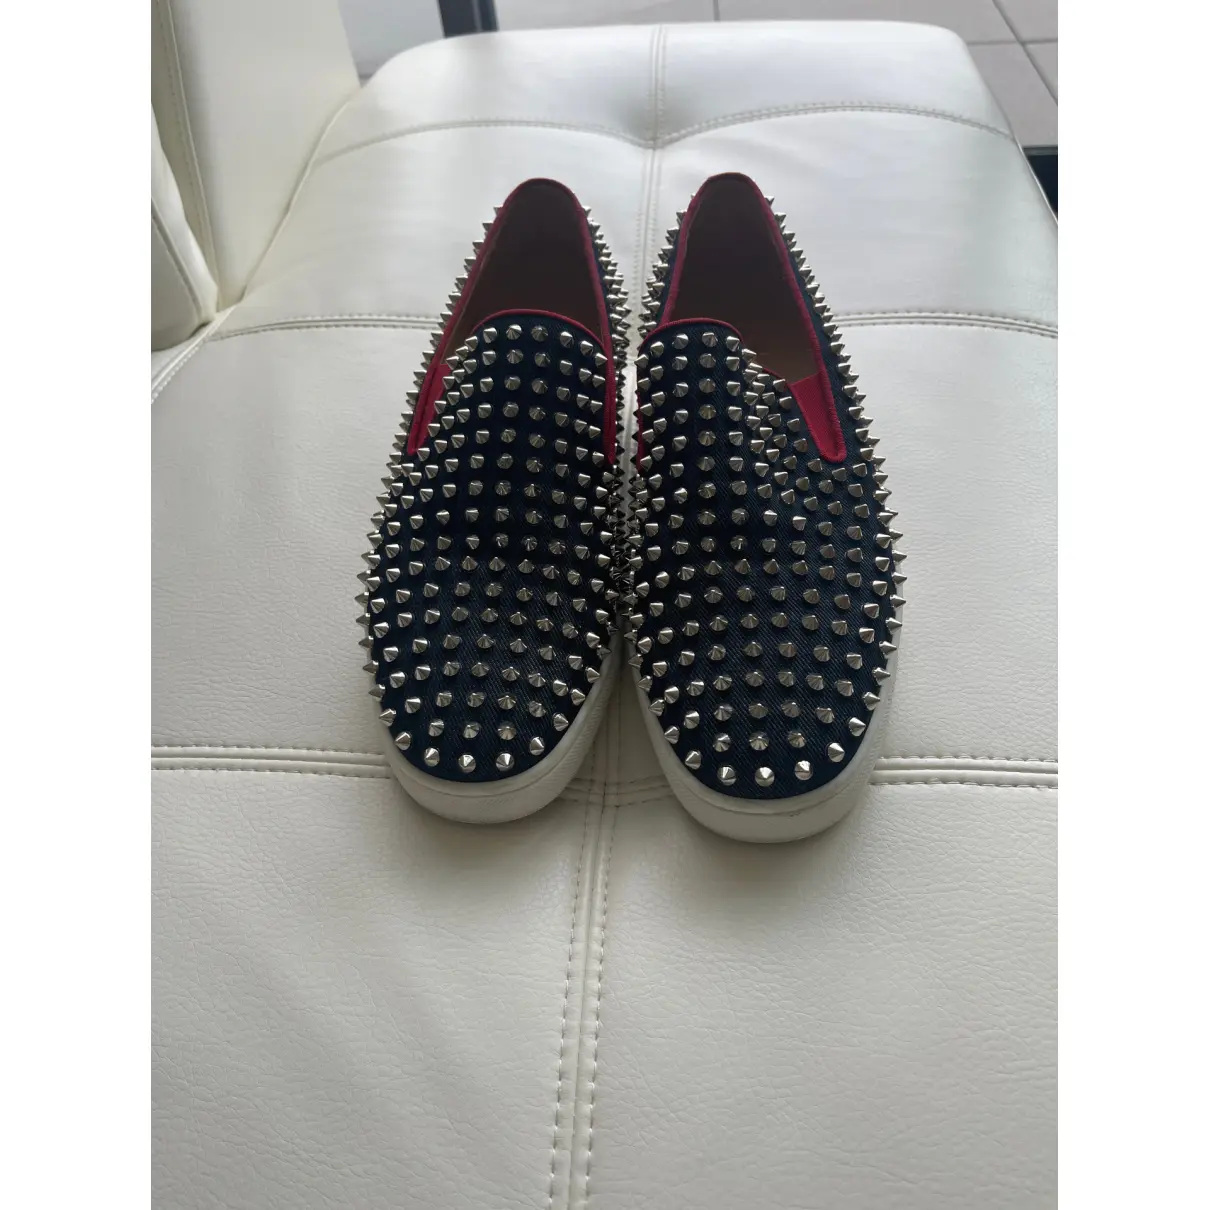 Buy Christian Louboutin Roller Boat low trainers online